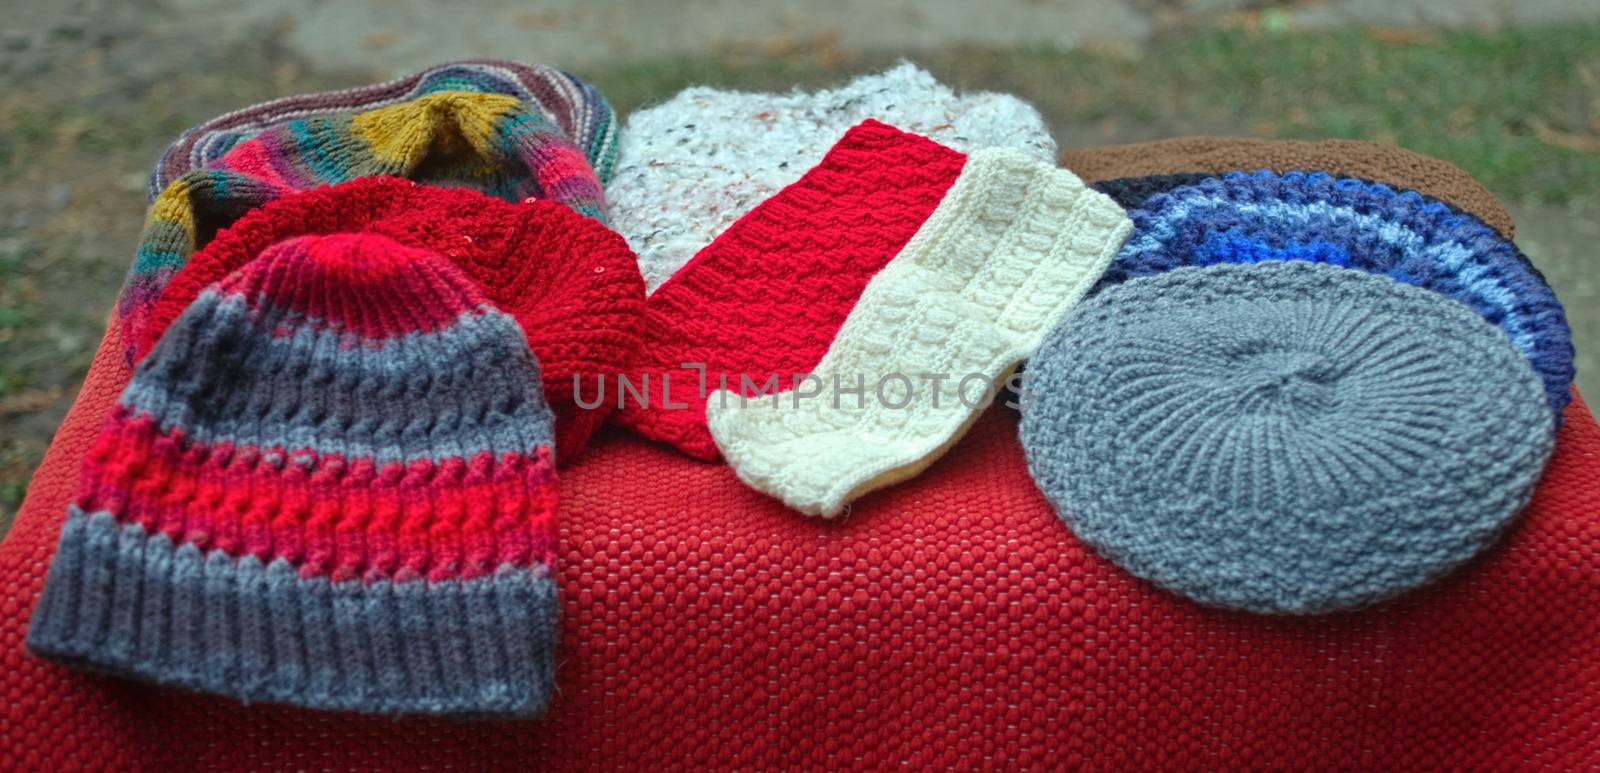 Many colorful handmade traditional winter hats on table